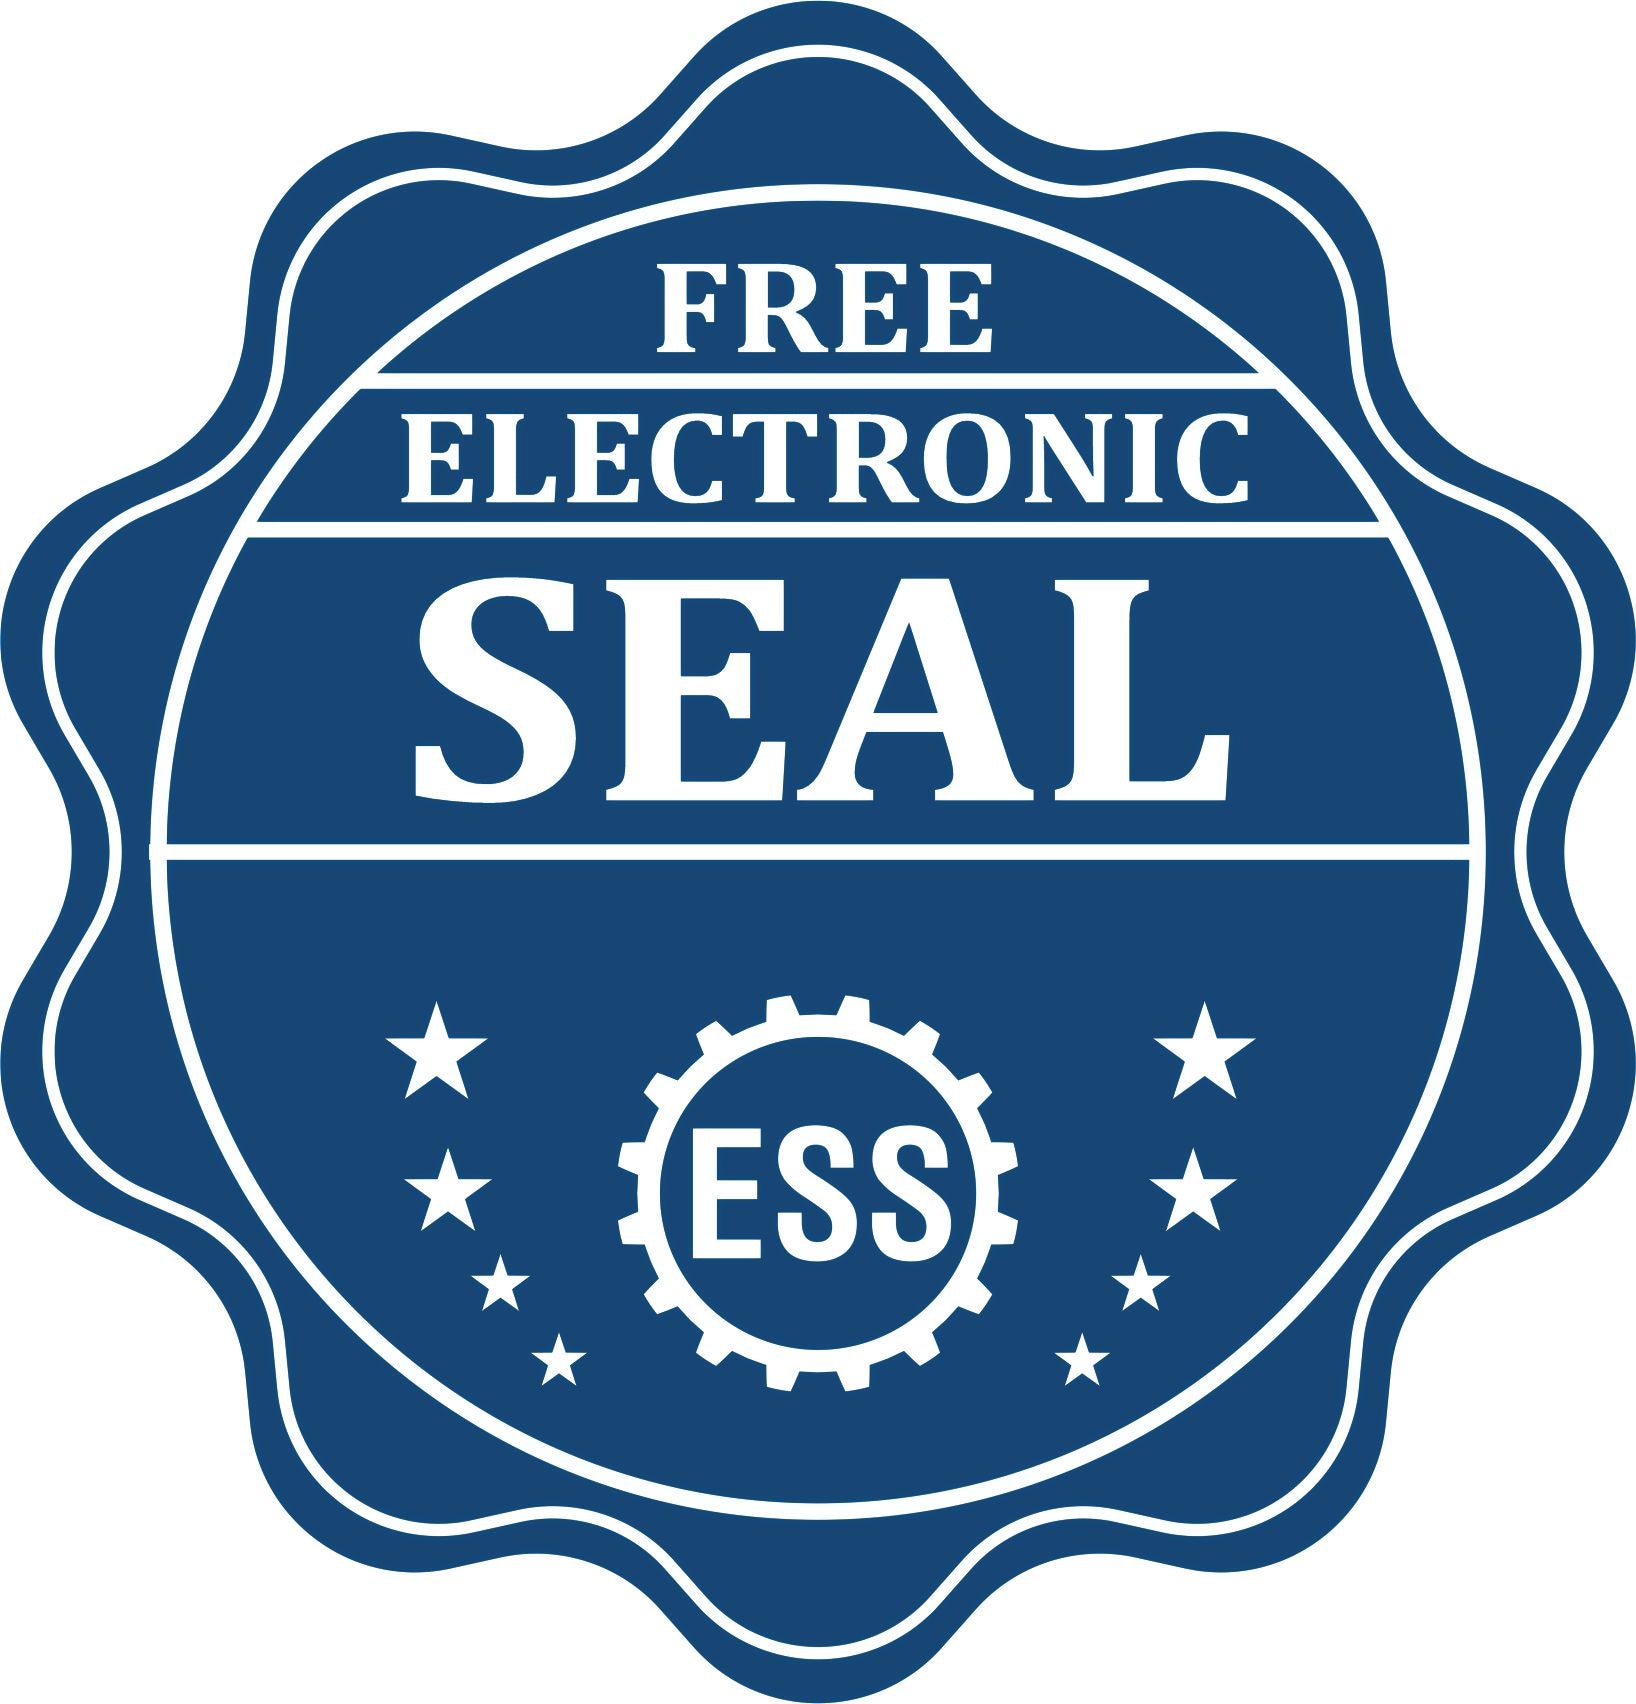 A badge showing a free electronic seal for the Self-Inking Vermont Landscape Architect Stamp with stars and the ESS gear on the emblem.